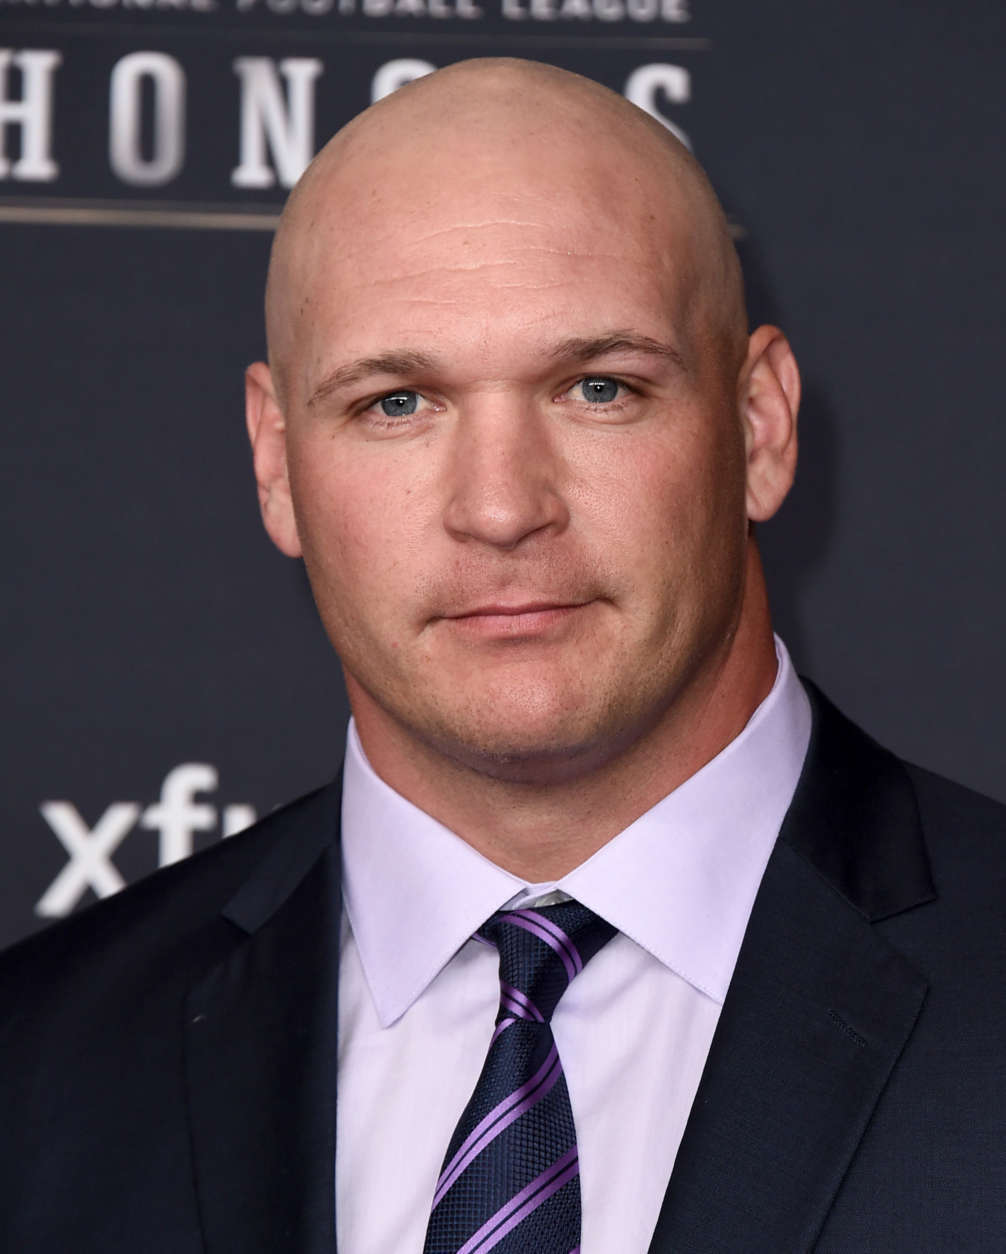 Former NFL player Brian Urlacher arrives at the 4th annual NFL Honors at the Phoenix Convention Center Symphony Hall on Saturday, Jan. 1, 2015. (Photo by Jordan Strauss/Invision for NFL/AP Images)